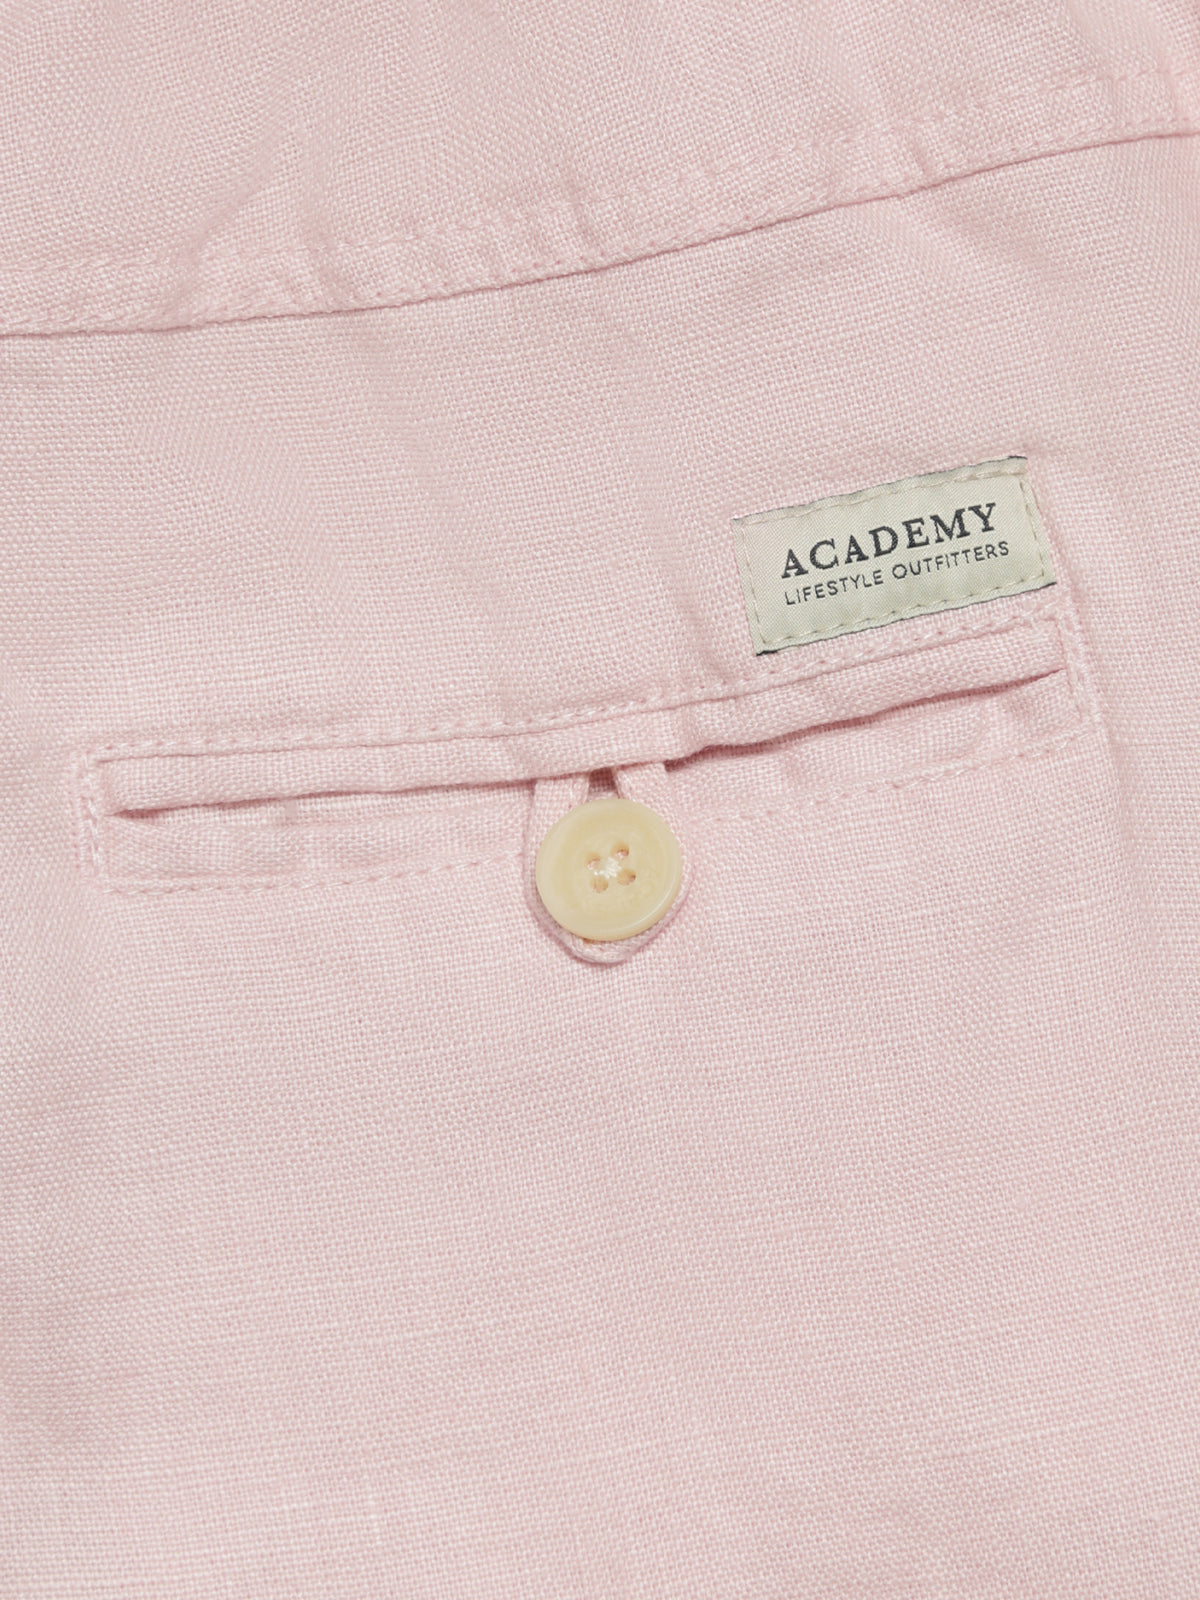 Riviera Linen Shorts in Musk Pink